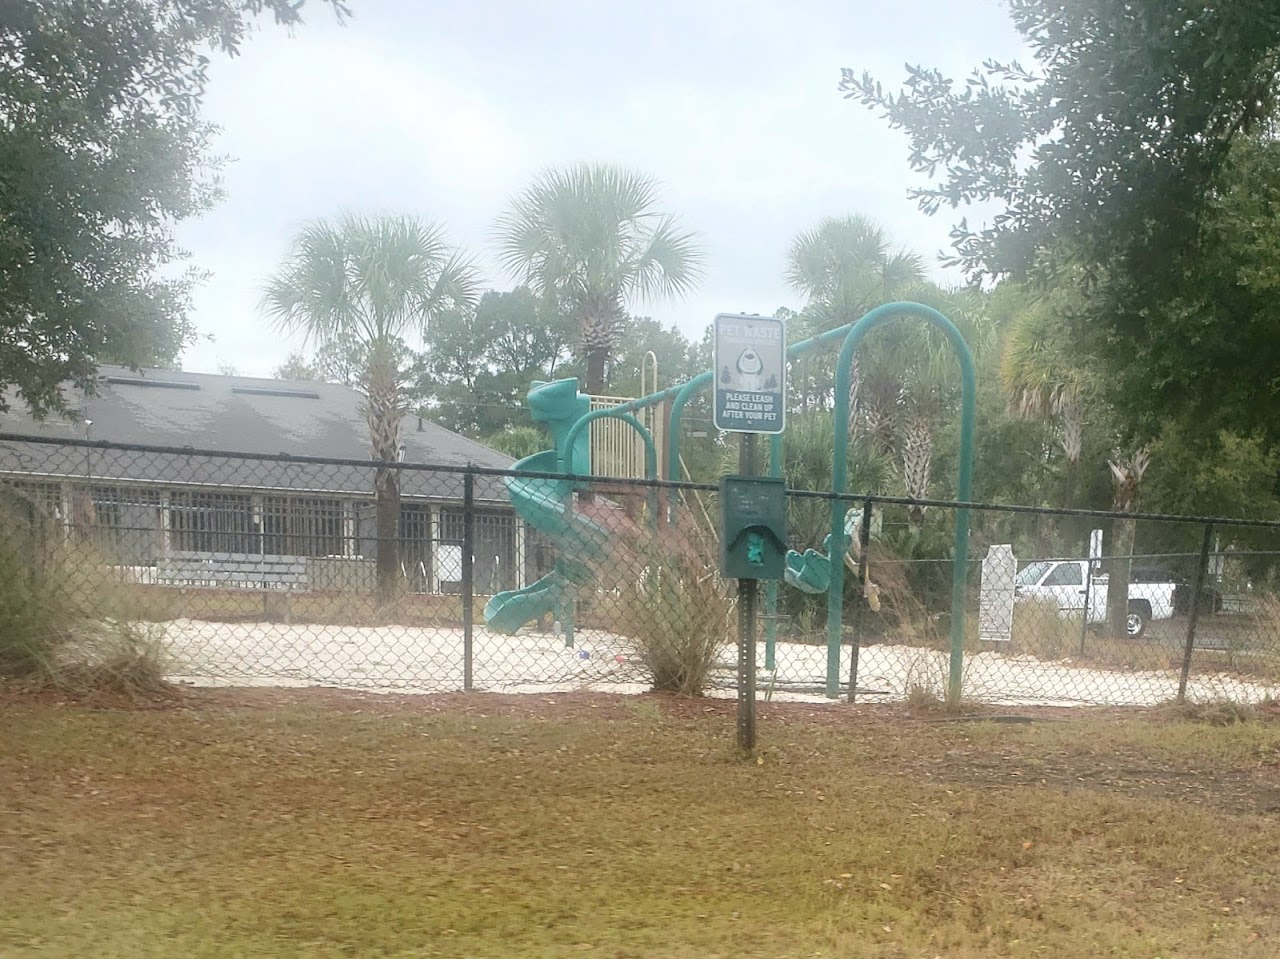 Photo of ARBOURS AT SHOEMAKER PLACE. Affordable housing located at 214 SHOEMAKER DRIVE DEFUNIAK SPRINGS, FL 32433